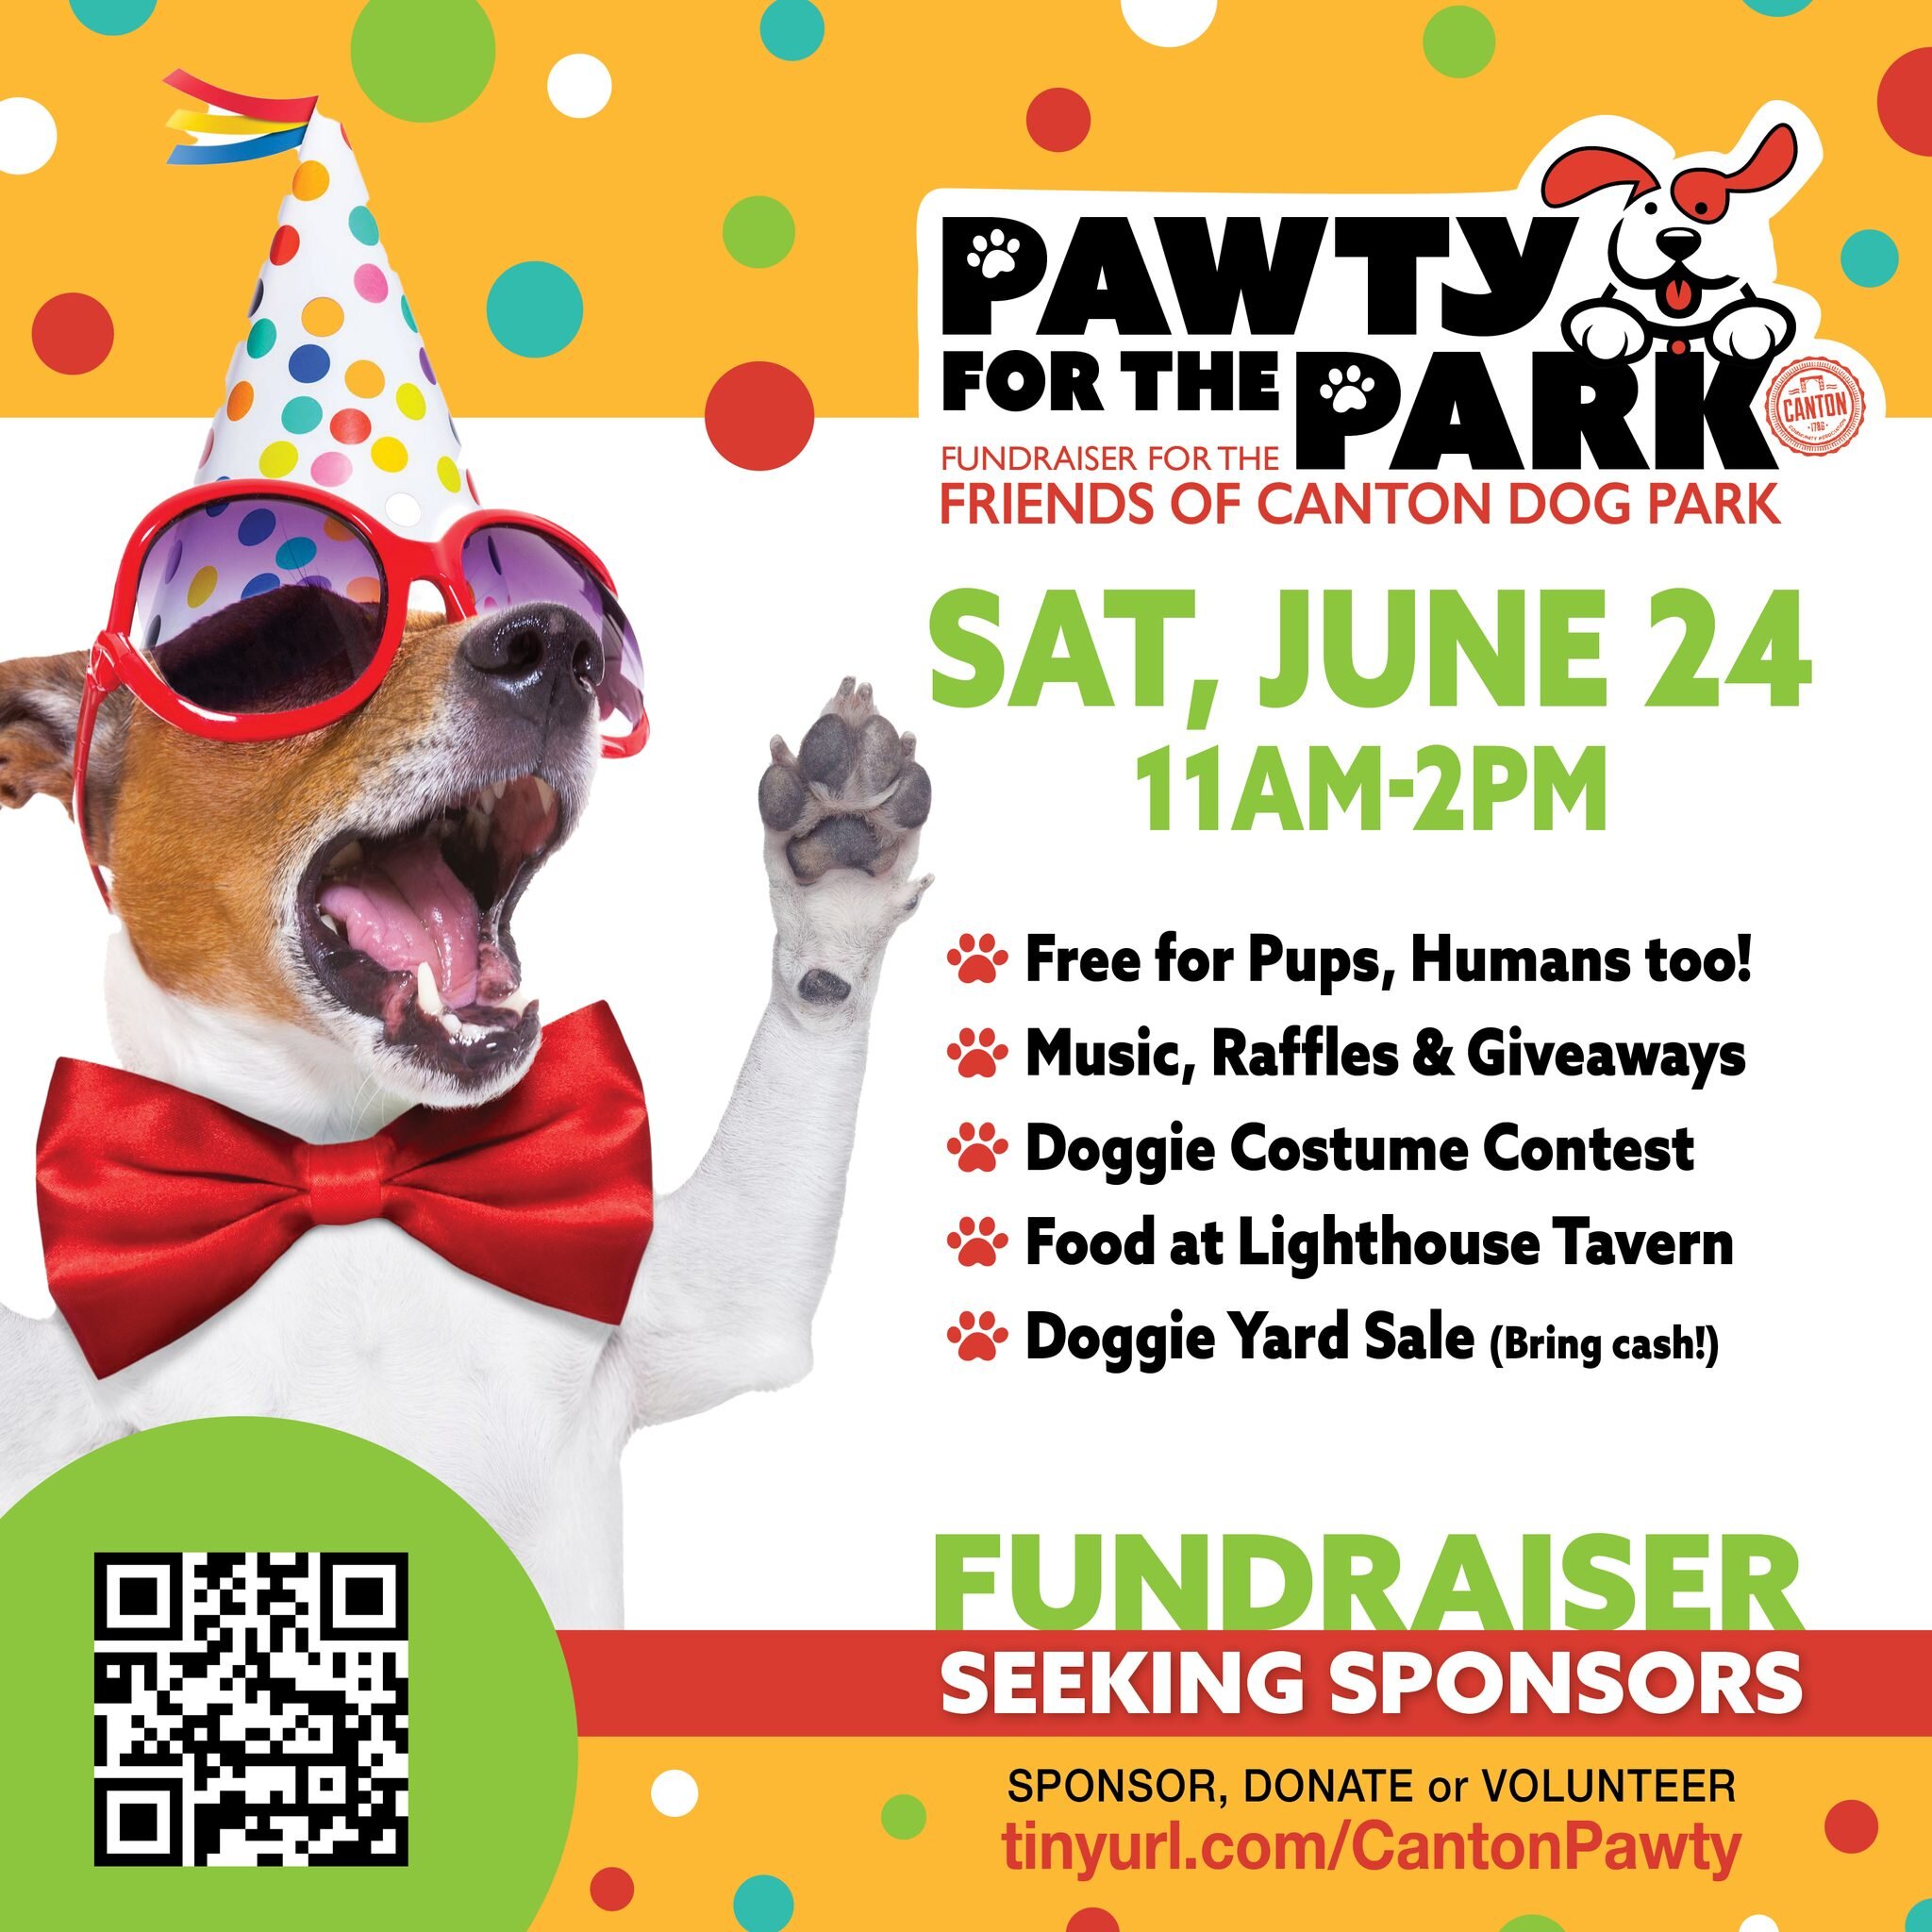 FUNDRAISER - The CCA Pawty for the Park 2023 is June 24, 2023!

After 20+ years, we have some major repairs to fund, and we need your help to do it! So, save the date, tell your friends, and please help us find sponsors to save this valuable Charm Ci